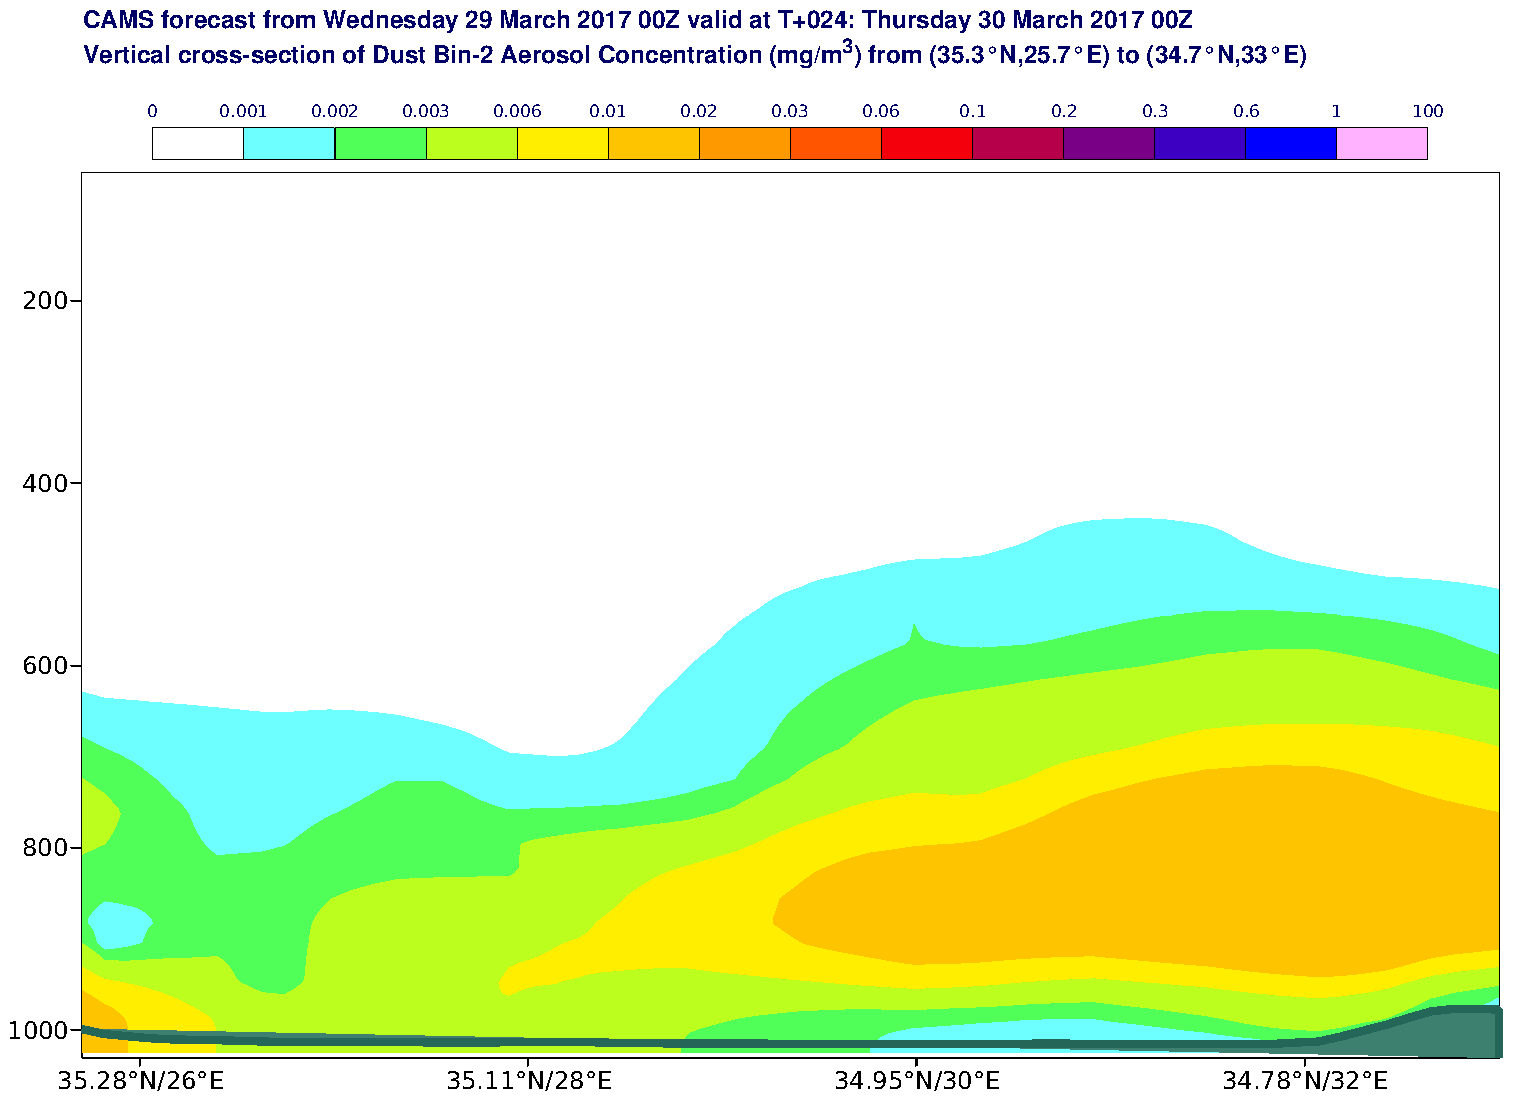 Vertical cross-section of Dust Bin-2 Aerosol Concentration (mg/m3) valid at T24 - 2017-03-30 00:00